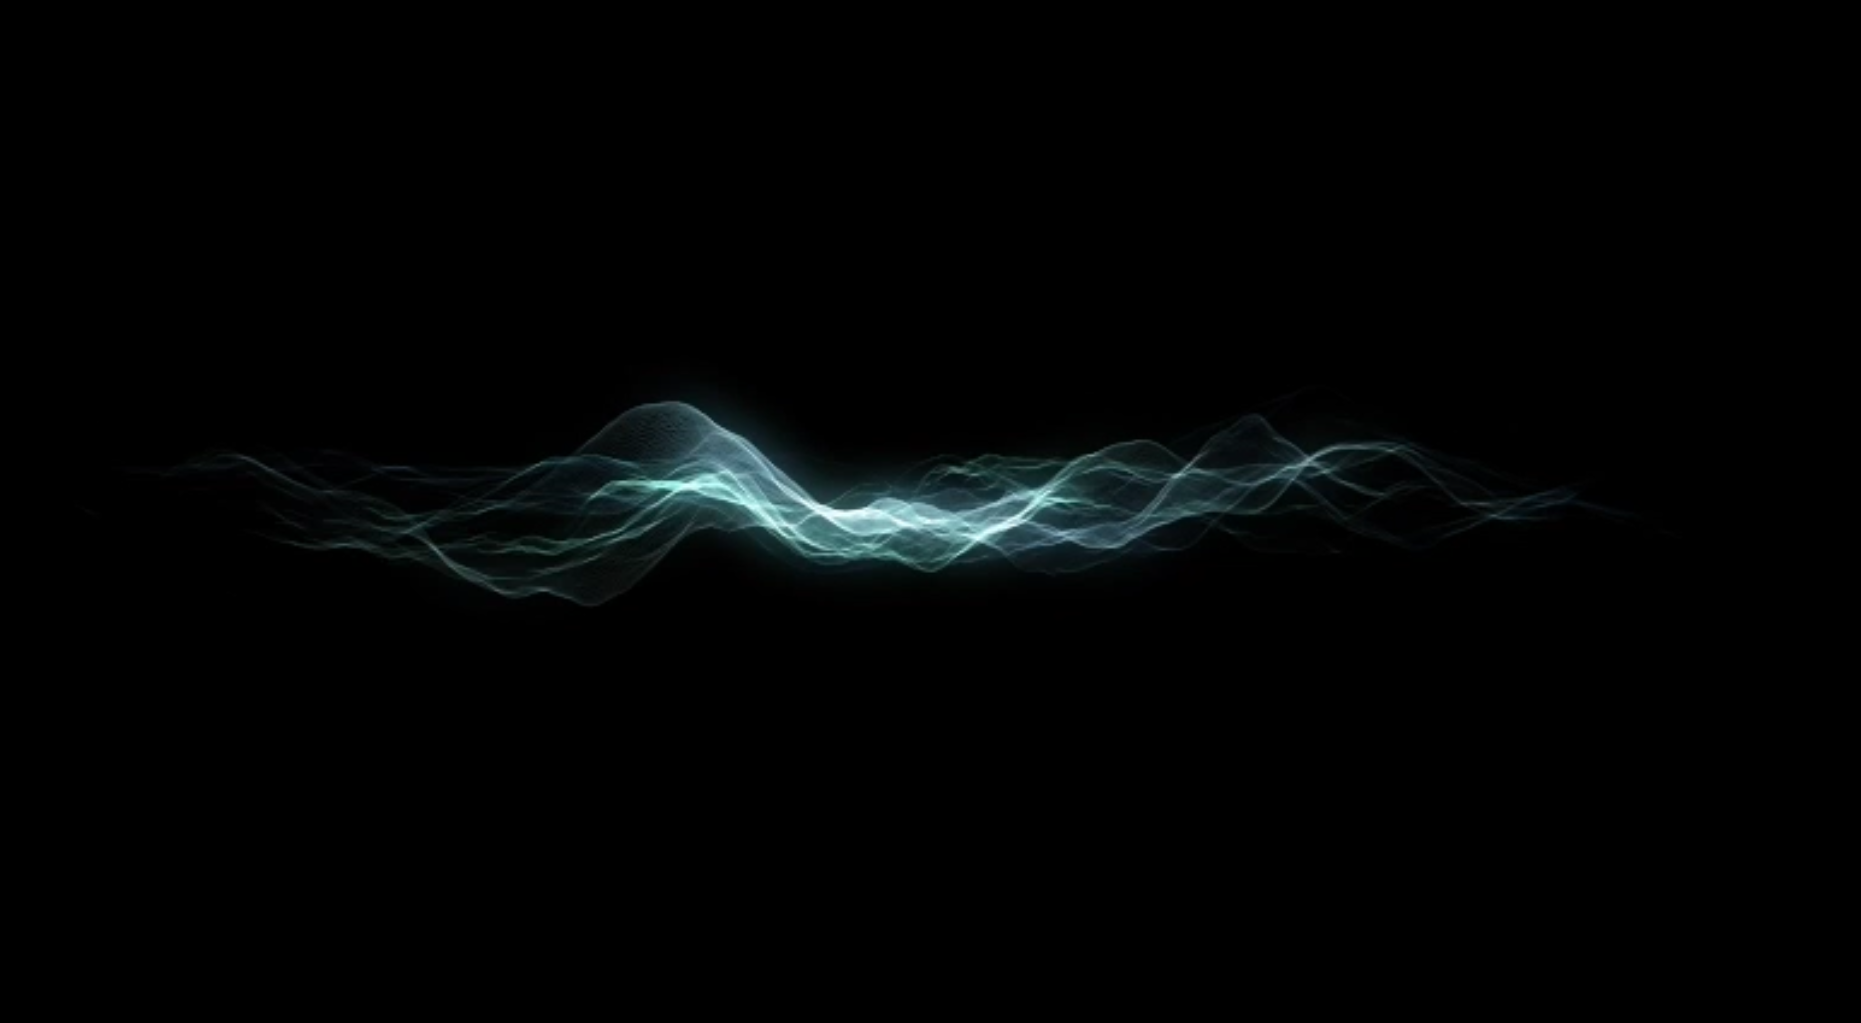 Image of a Sound wave. Starts a film about Dirac.